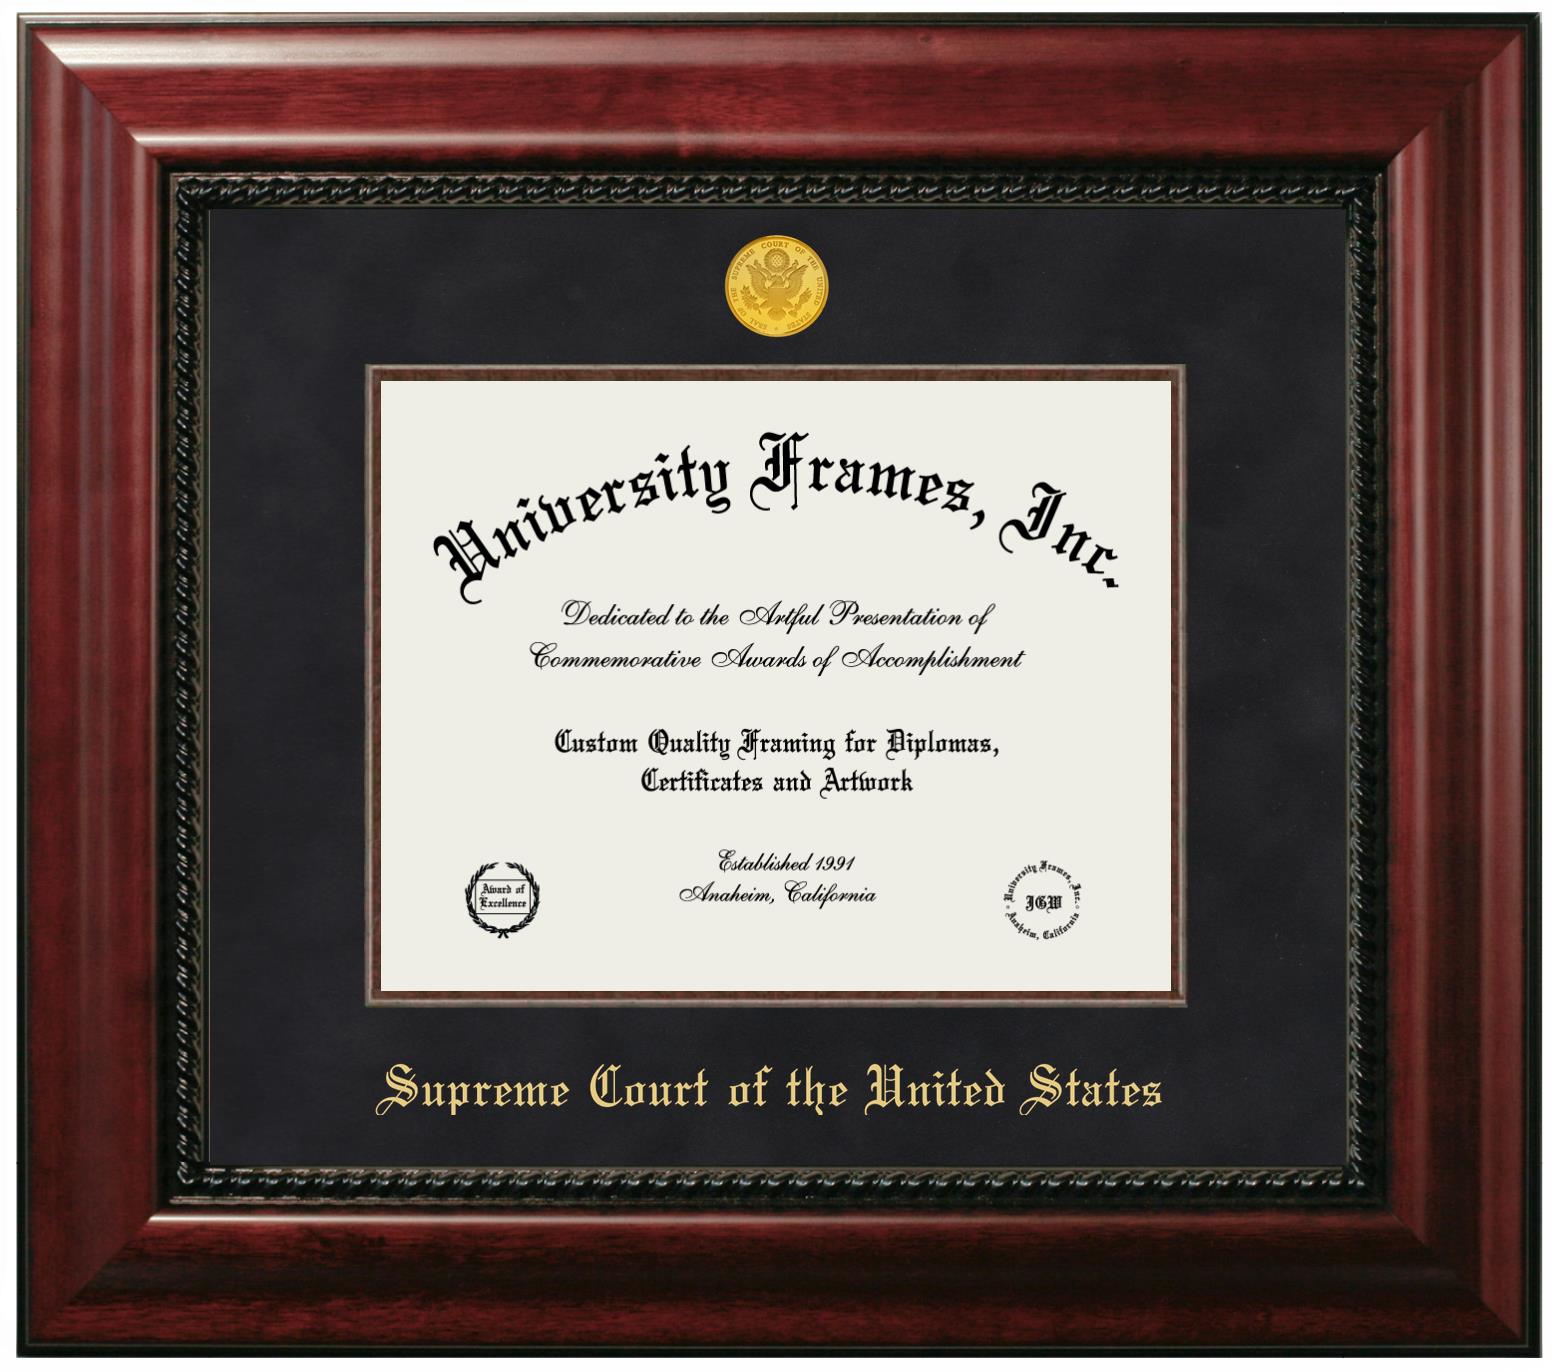 Supreme Court of the United States Diploma Frame in Executive with